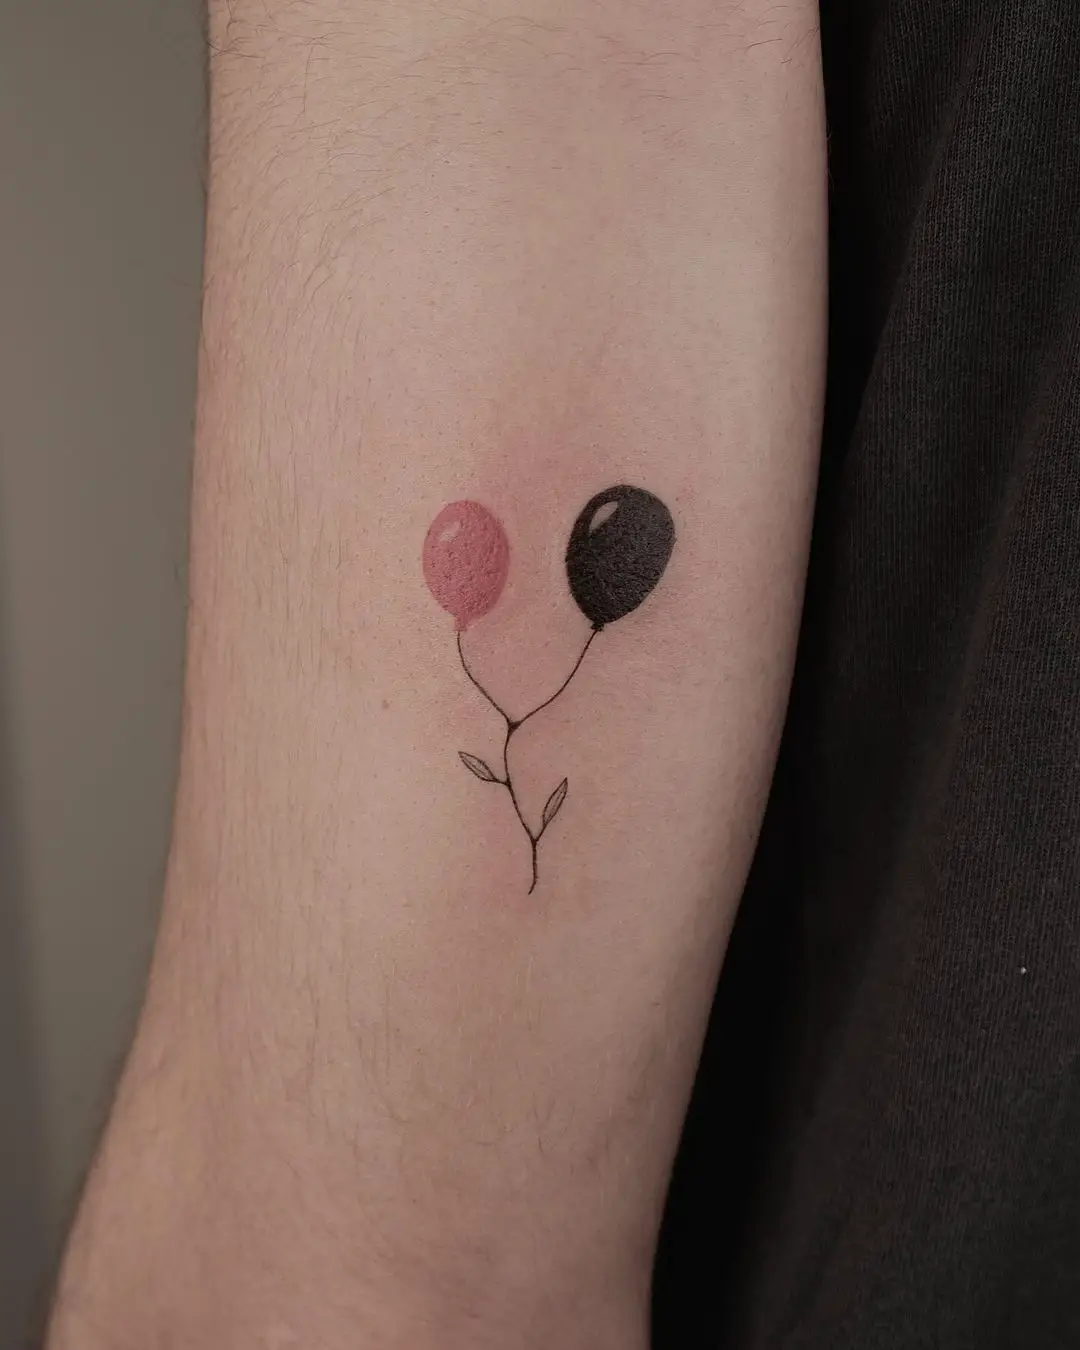 cute balloon design by yuccatattoo